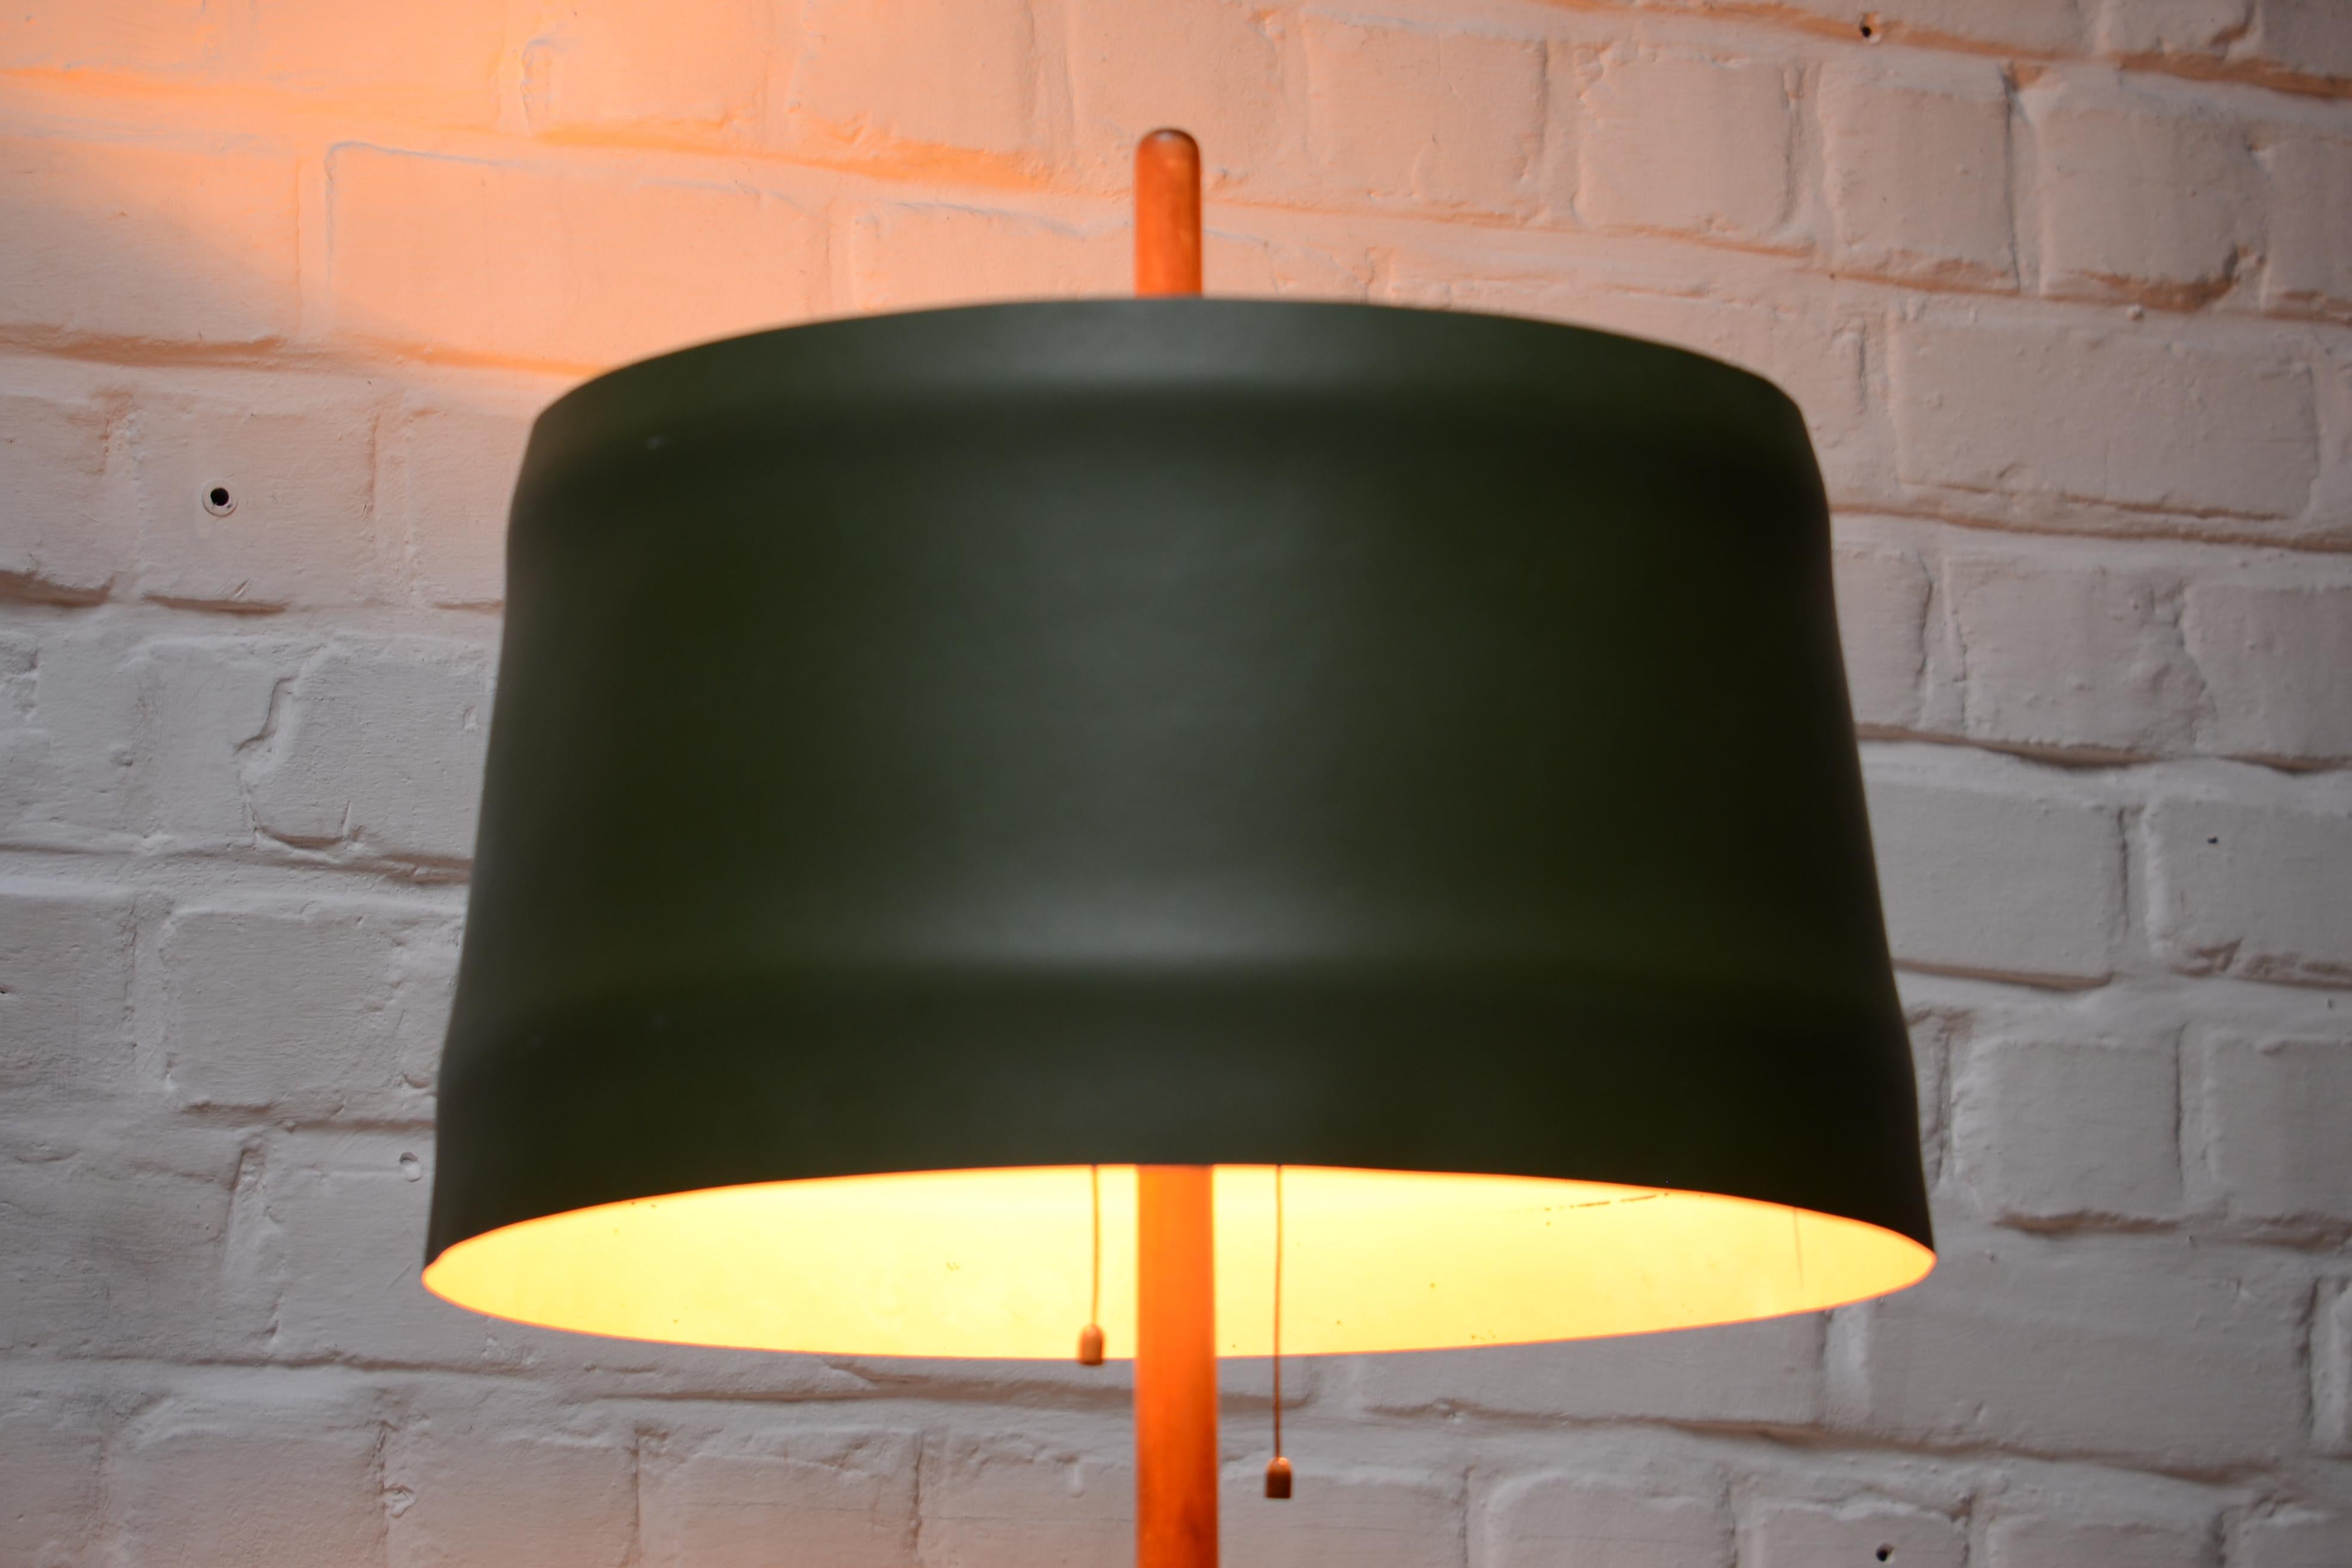 Teak and green leather floor lamp by Uno & Osten Kristiansson. The shade is made of green leather over a white painted frame. On top you can see a part of the teak tubular frame. Two bubble light with two cords of leather to turn them on or off.